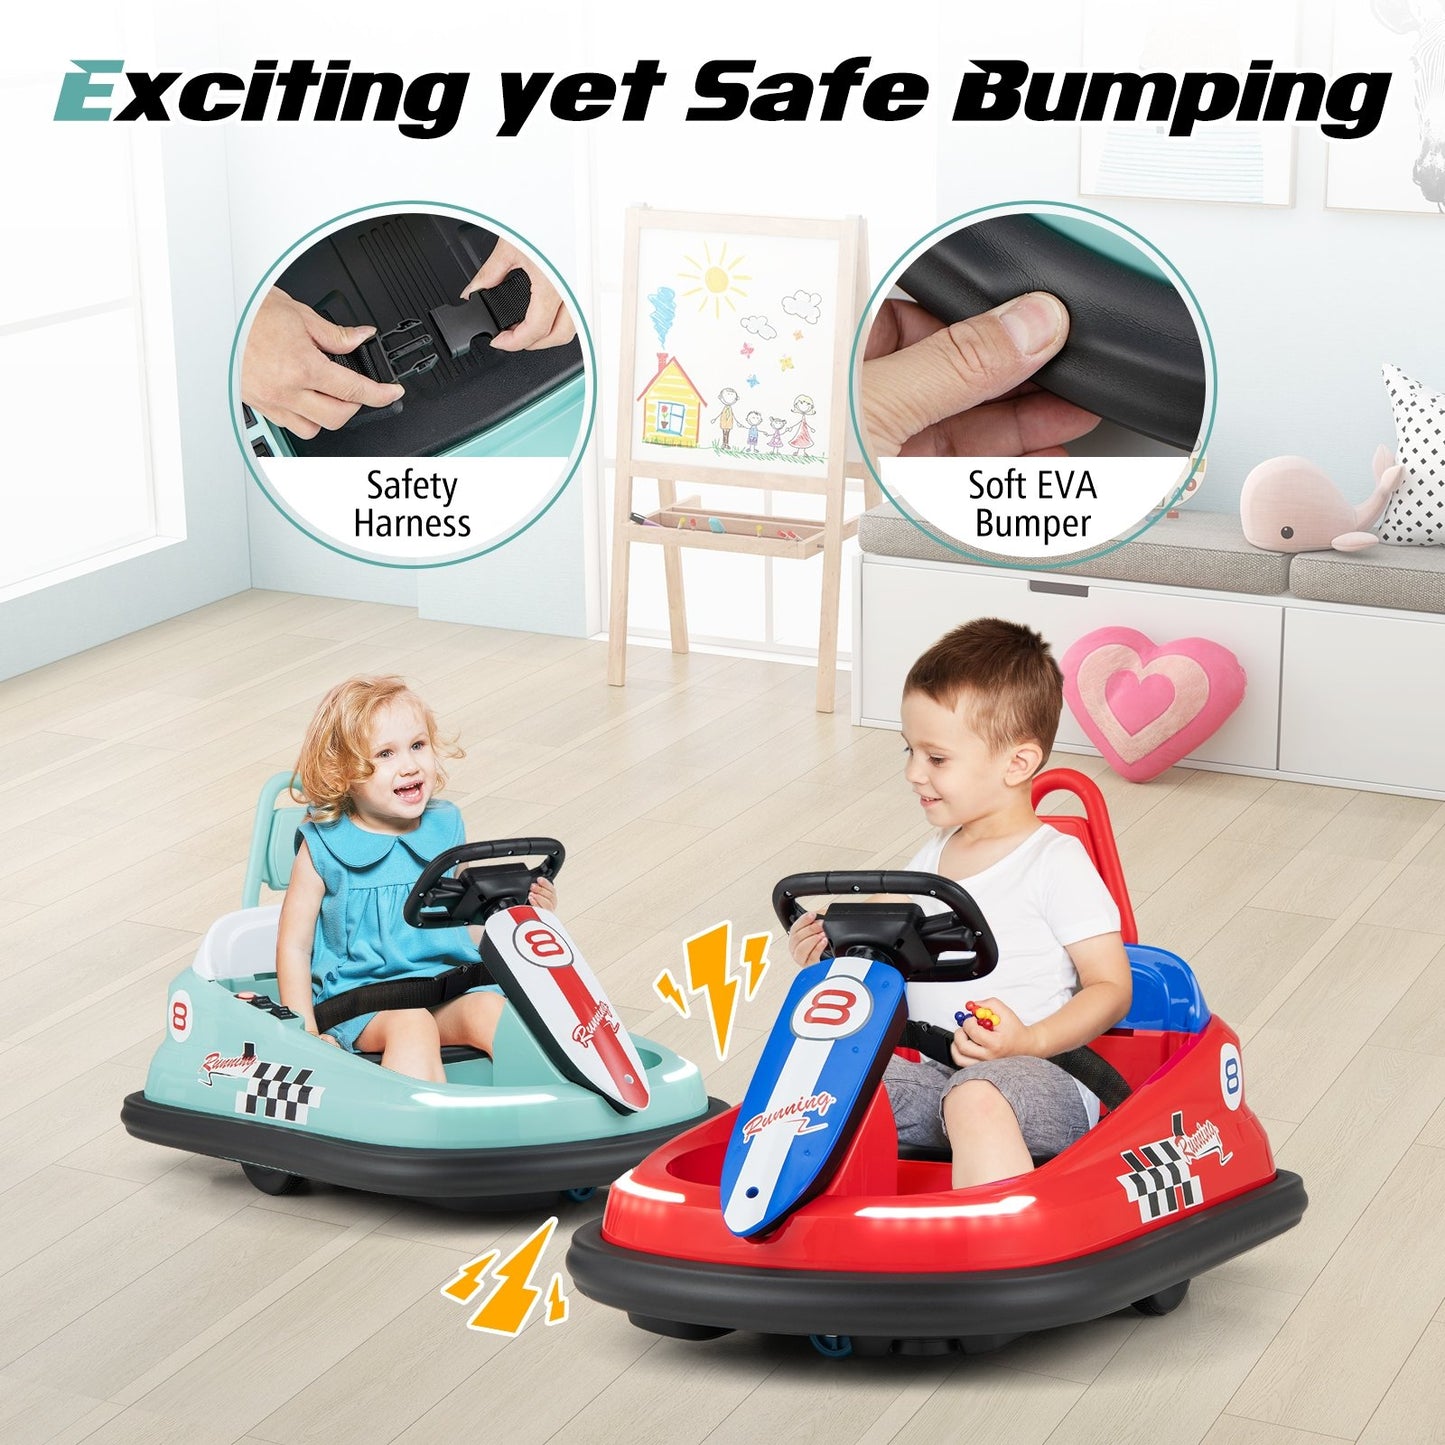 6V kids Ride-on Bumper Car with 360° Spinning and Dual Motors, Green